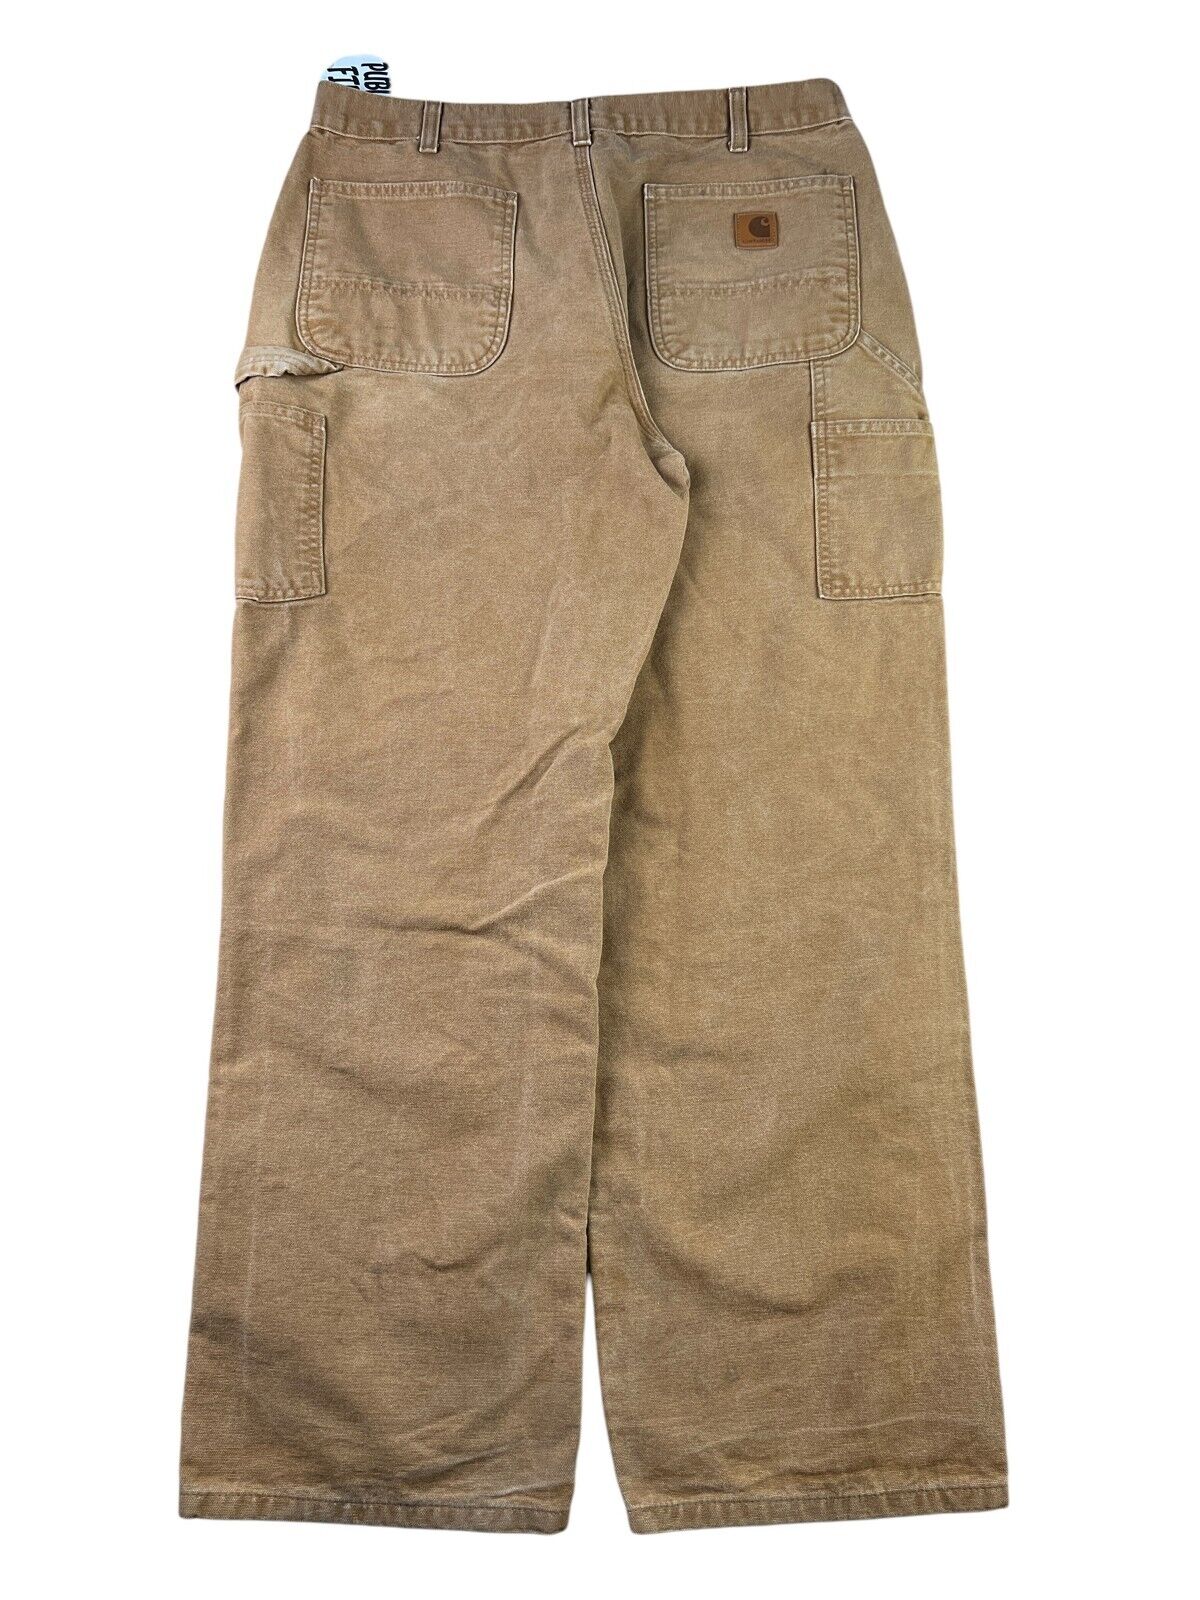 Vintage Carhartt Carpenter Canvas Workwear Dungaree Fit Pants Size 34W Brown